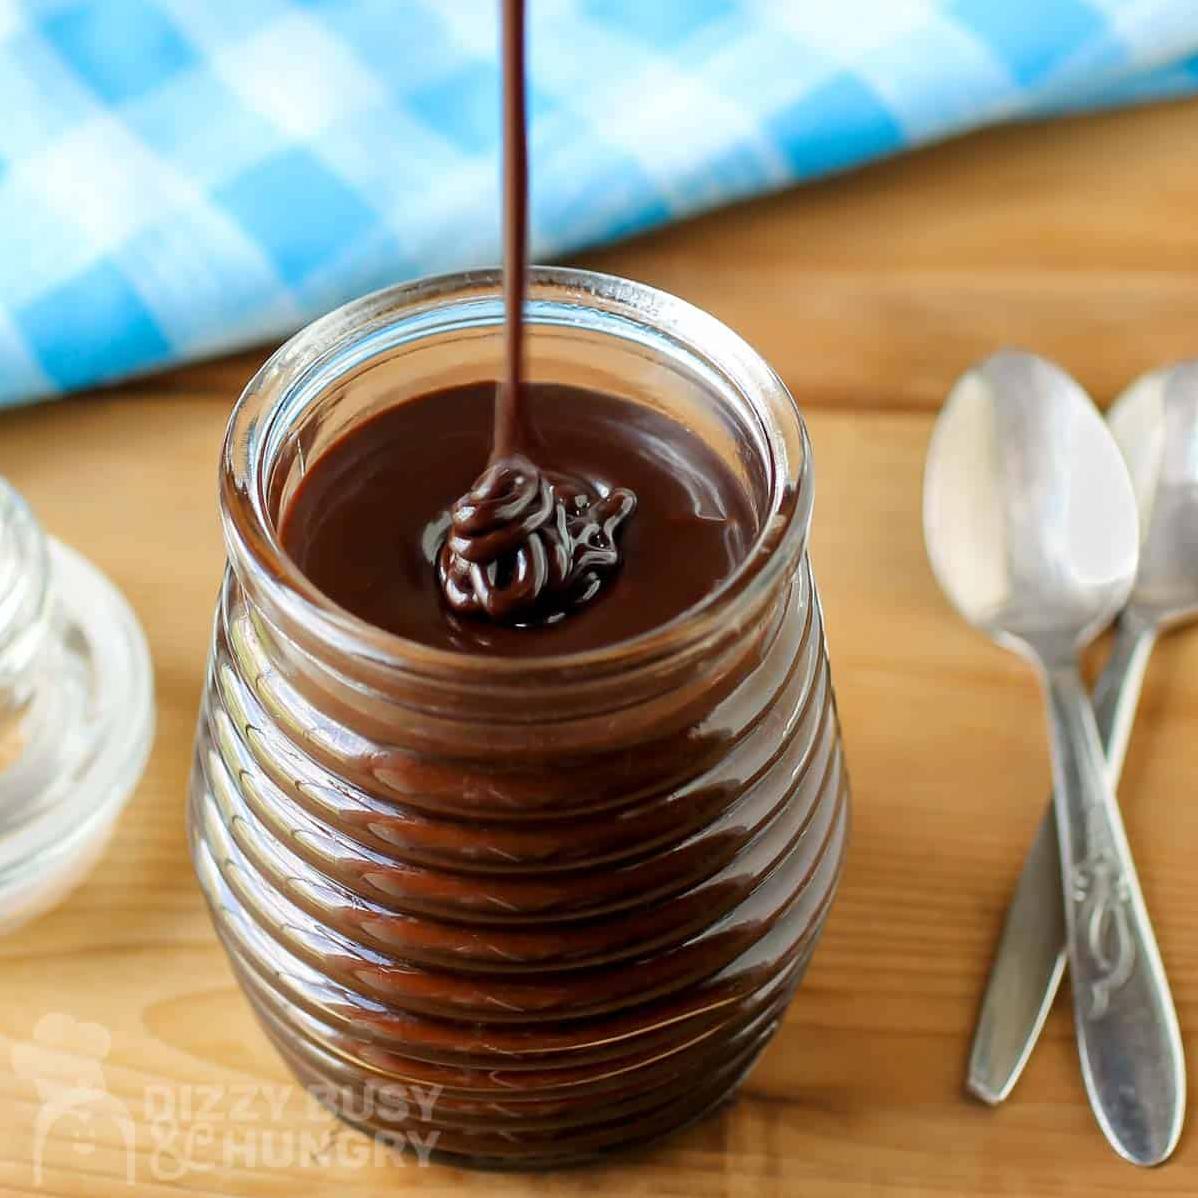  Drizzle, pour or dip your way into a chocolate wonderland with this decadent sauce.